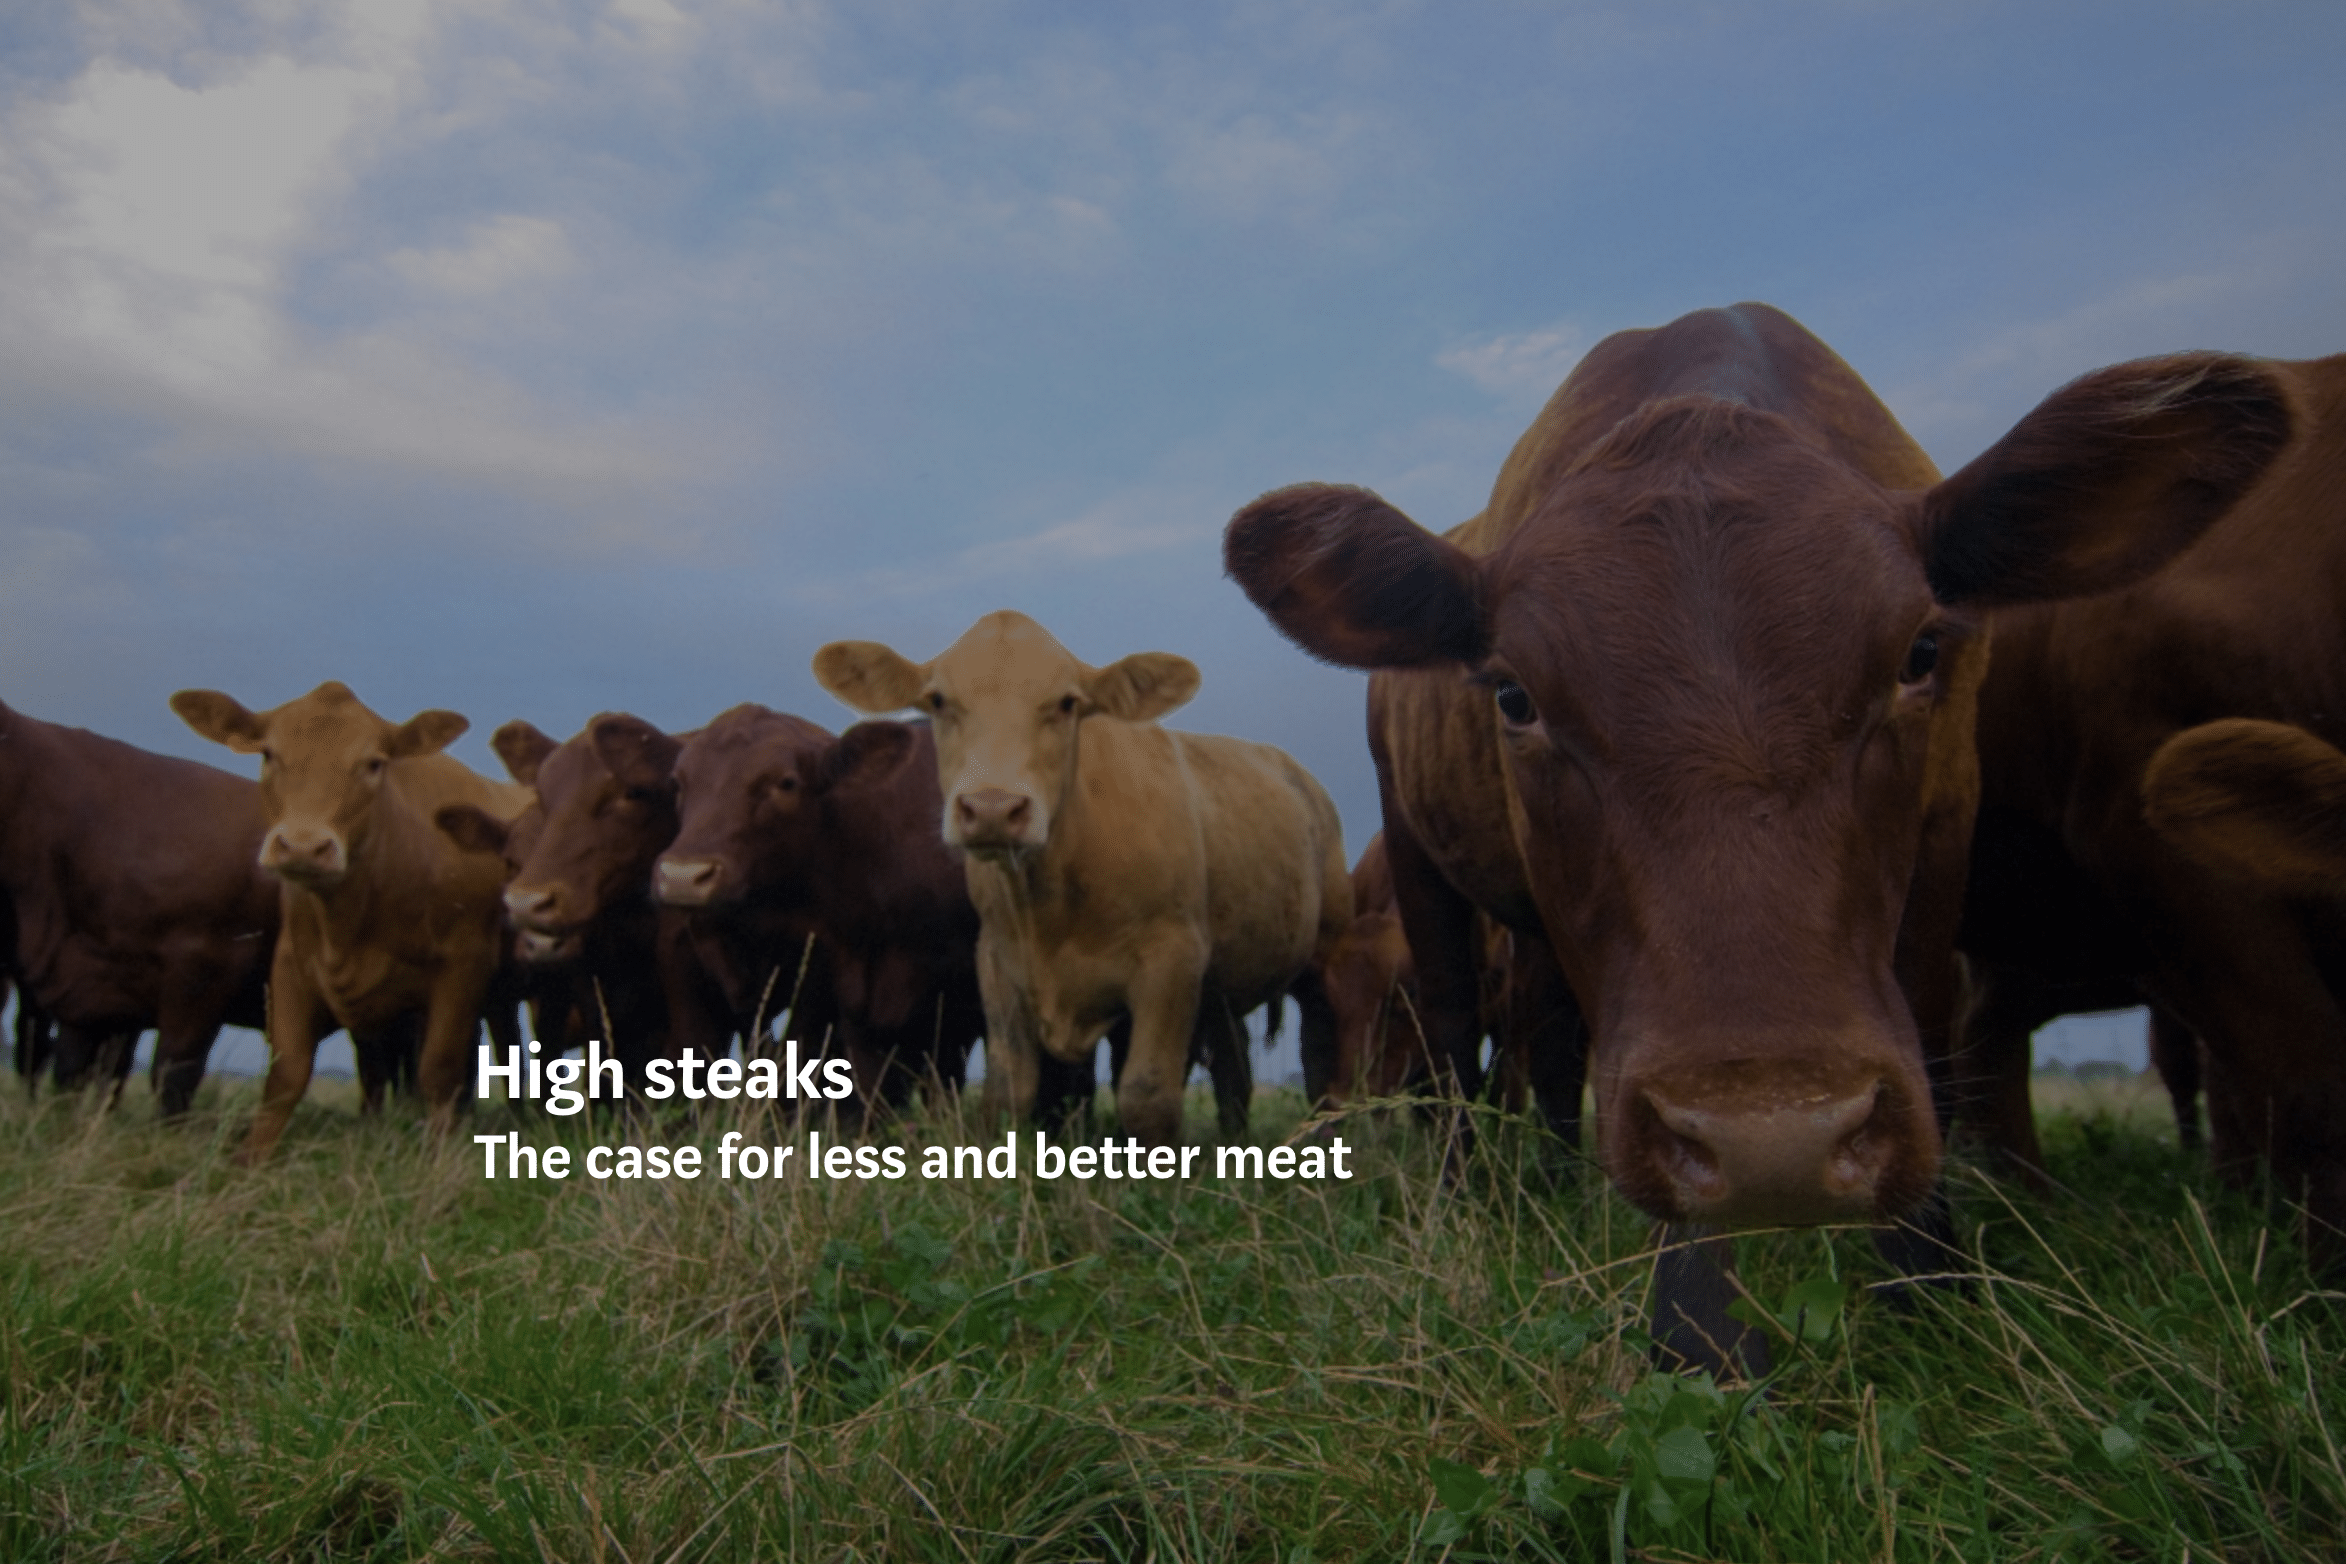 High steaks: The case for less and better meat